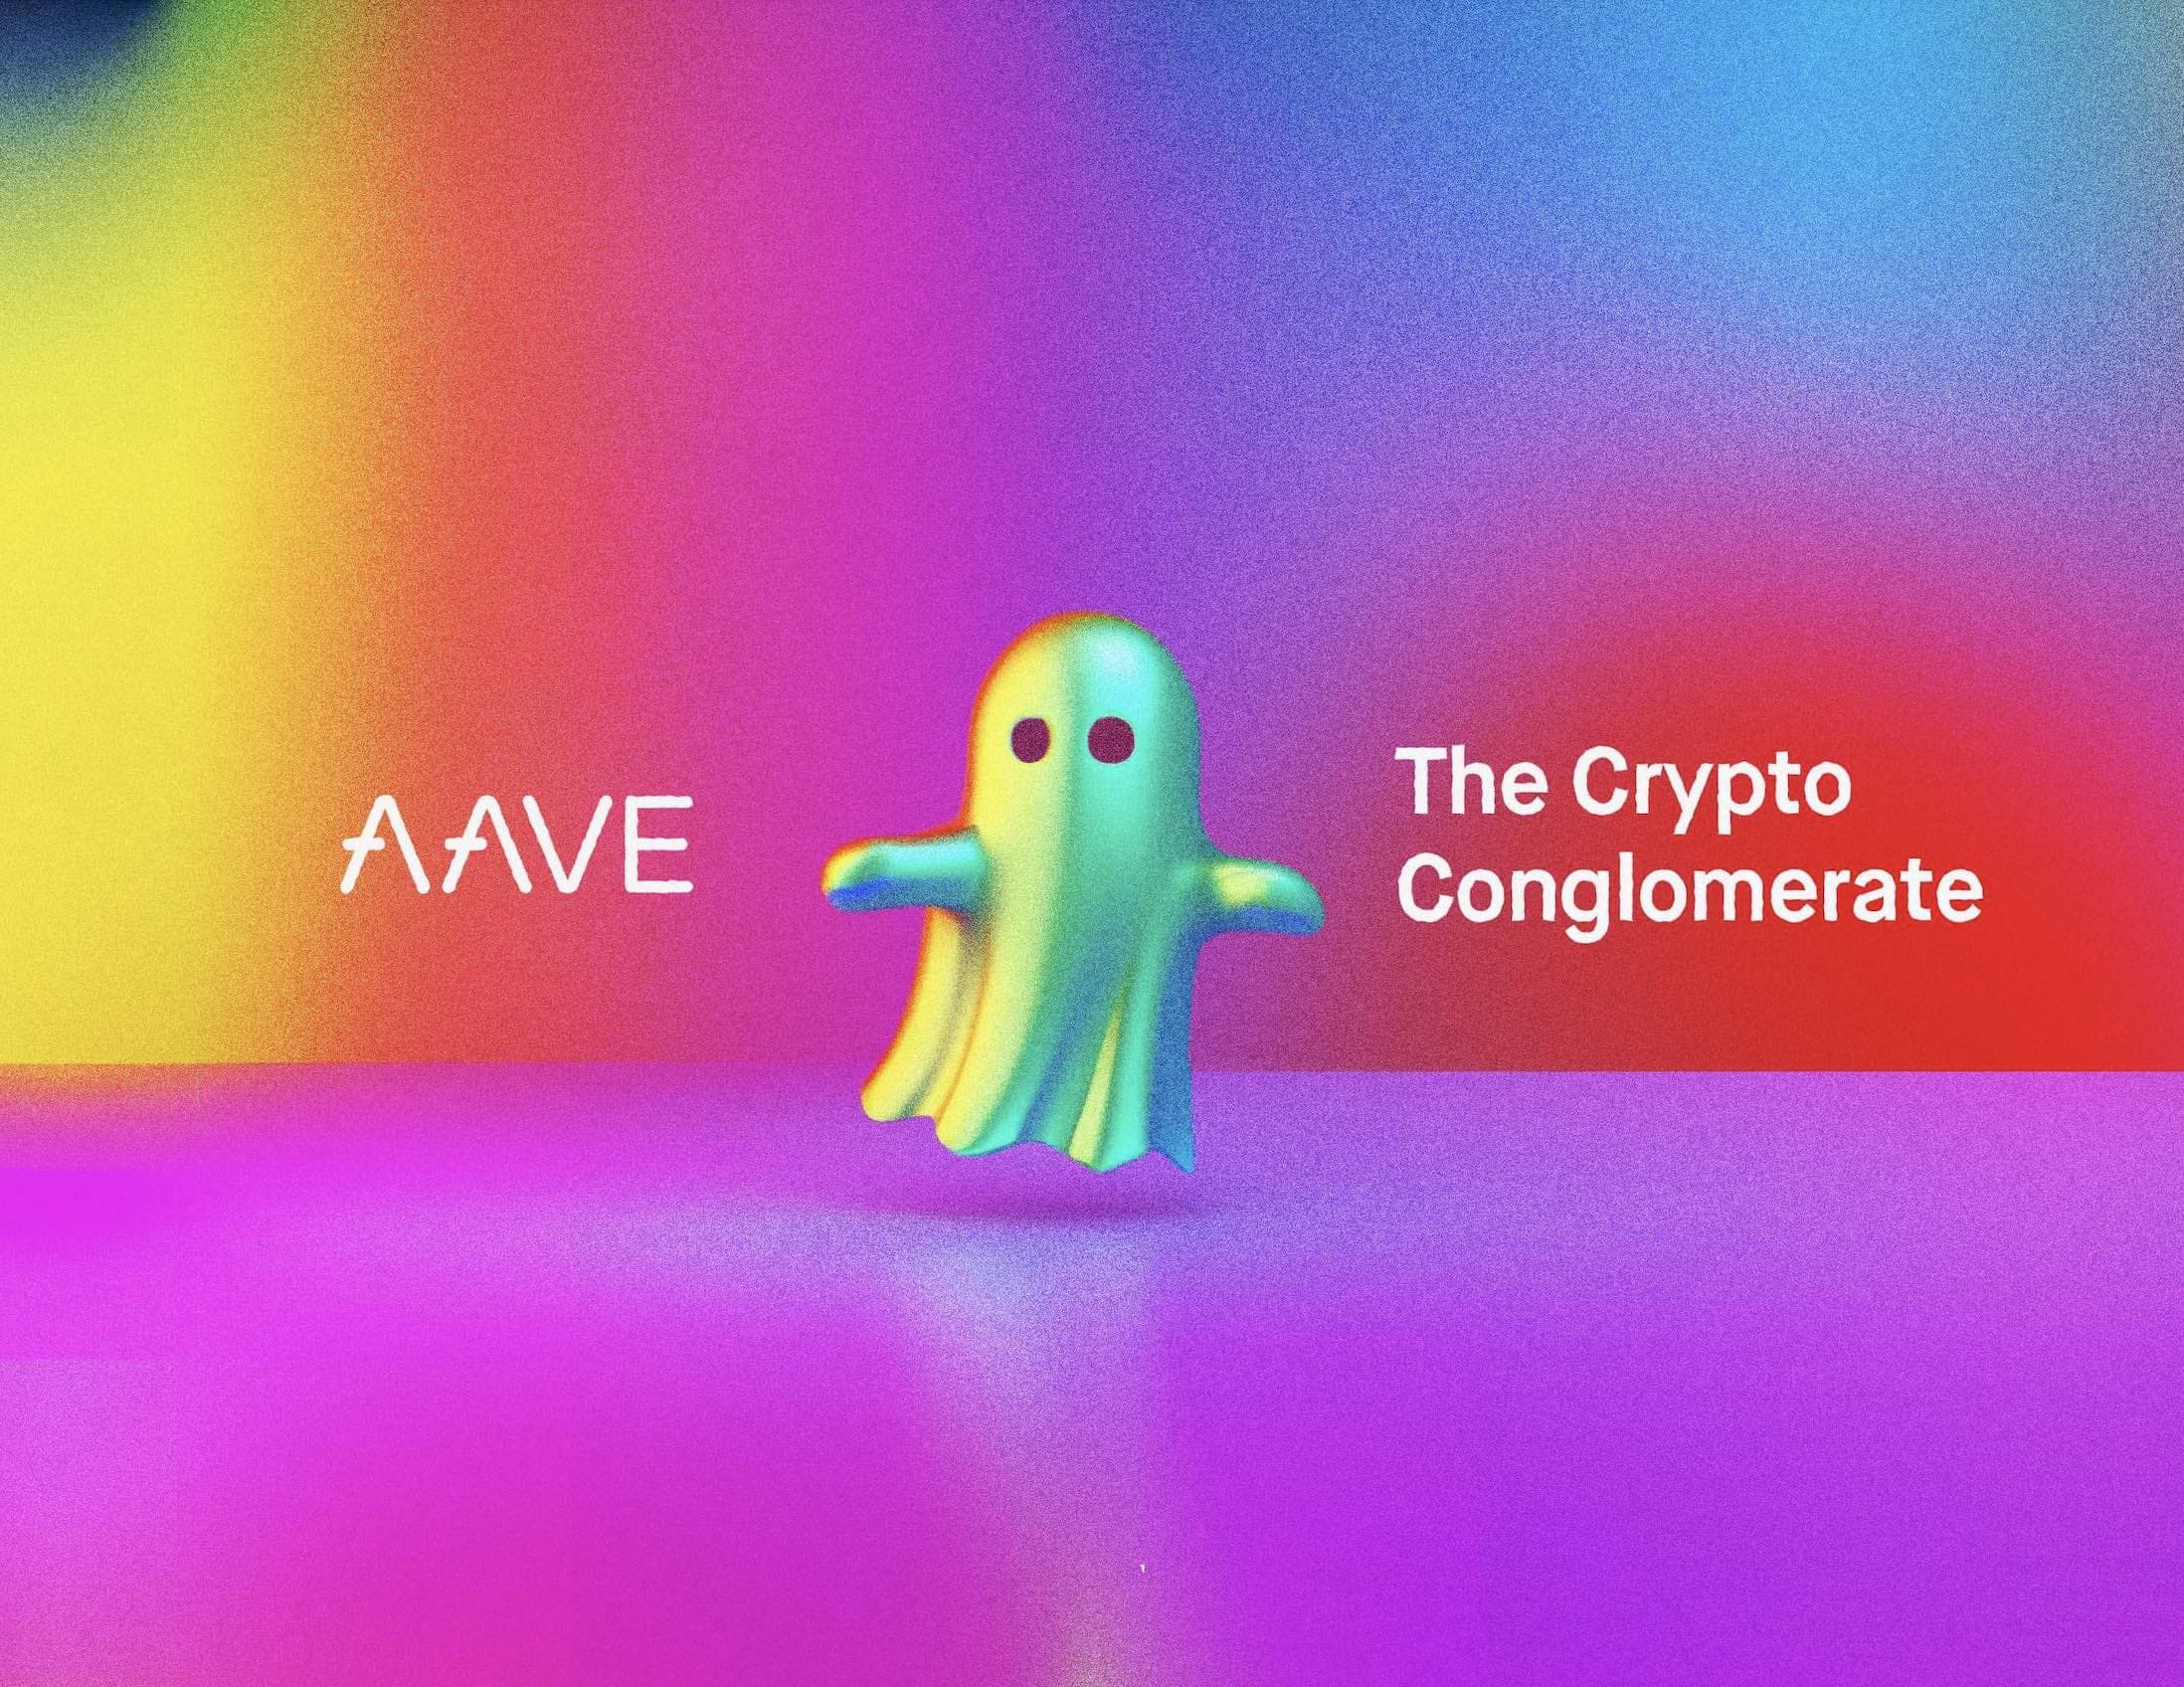 Aave: The Crypto Conglomerate